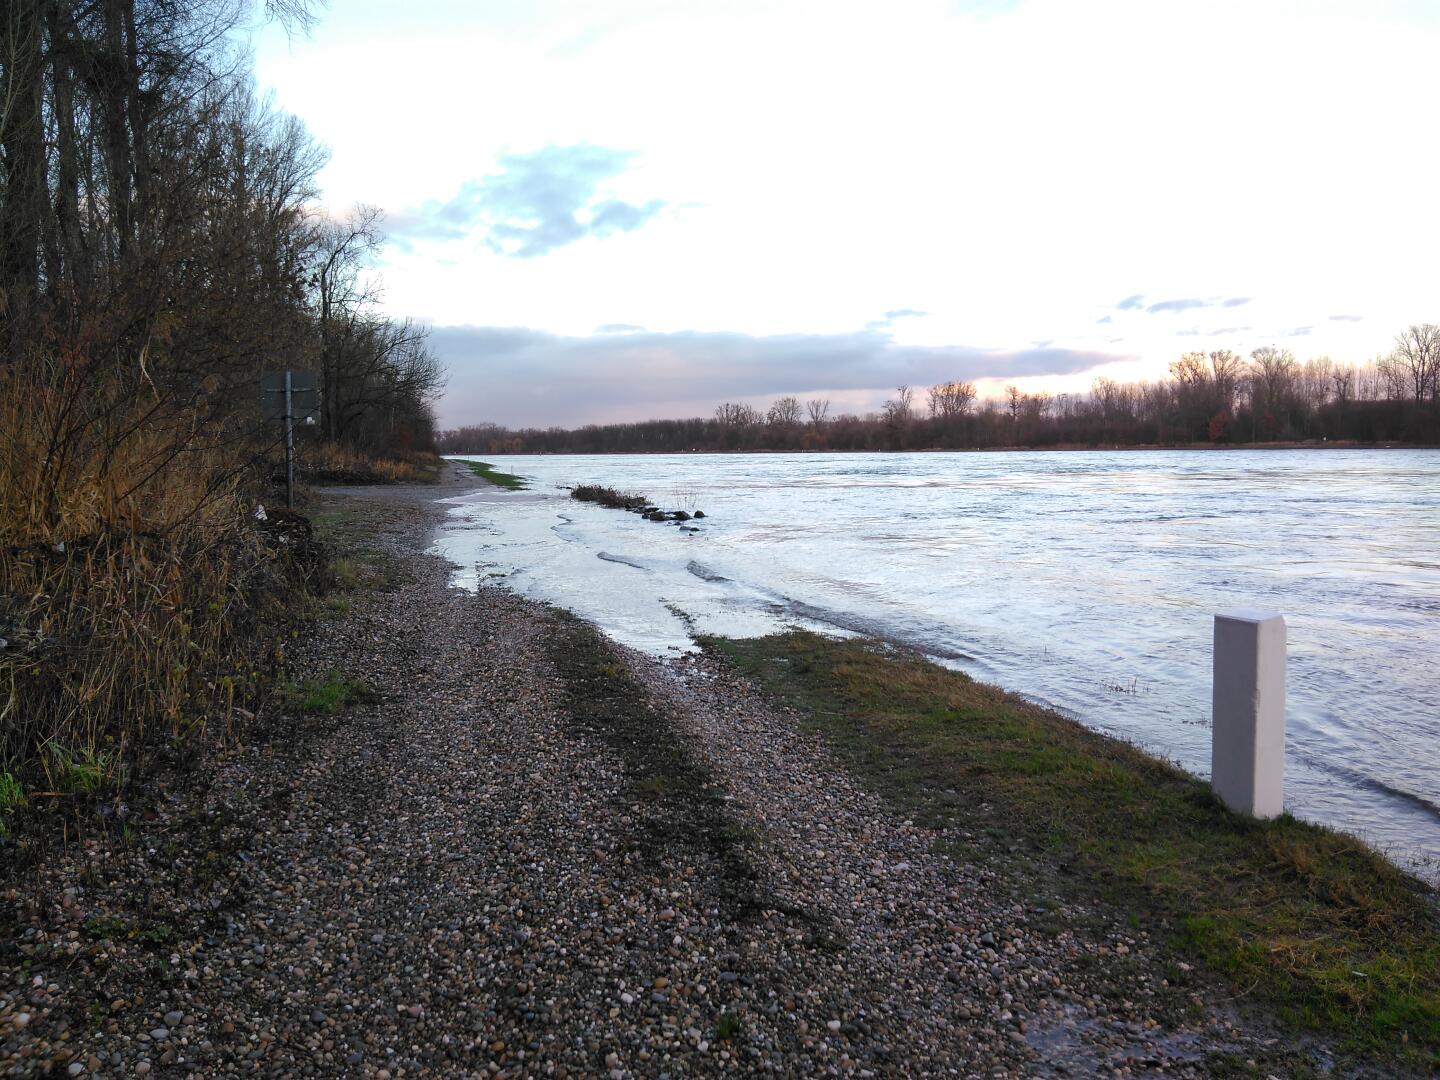 Inundated section of the path.